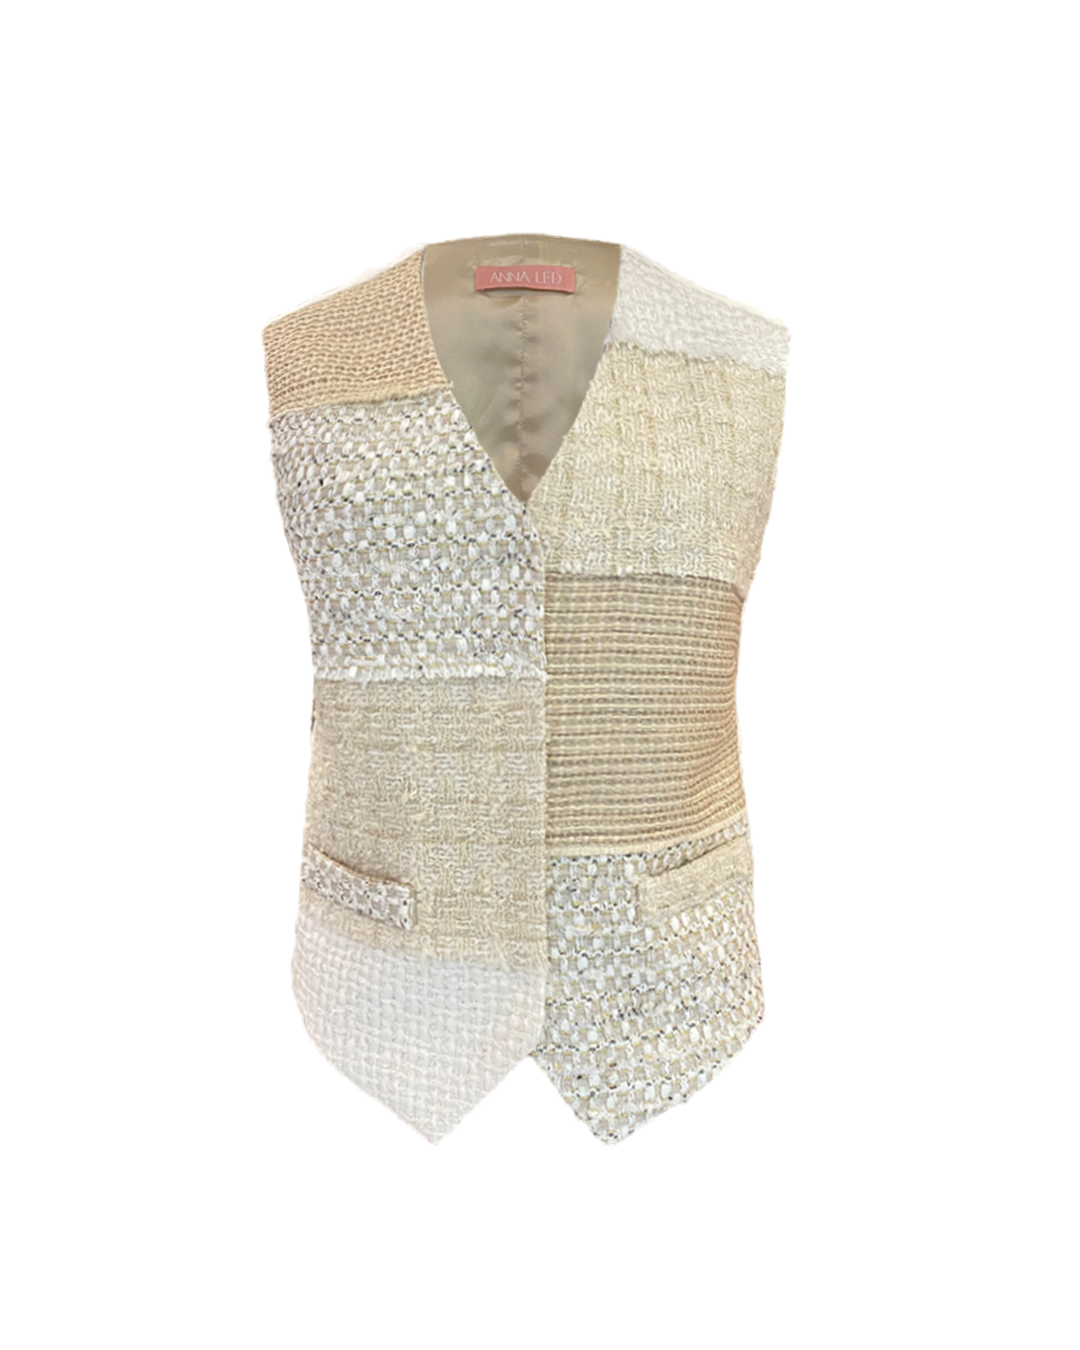 BEIGE PATCHWORK VEST AW23/24 - SOLD OUT